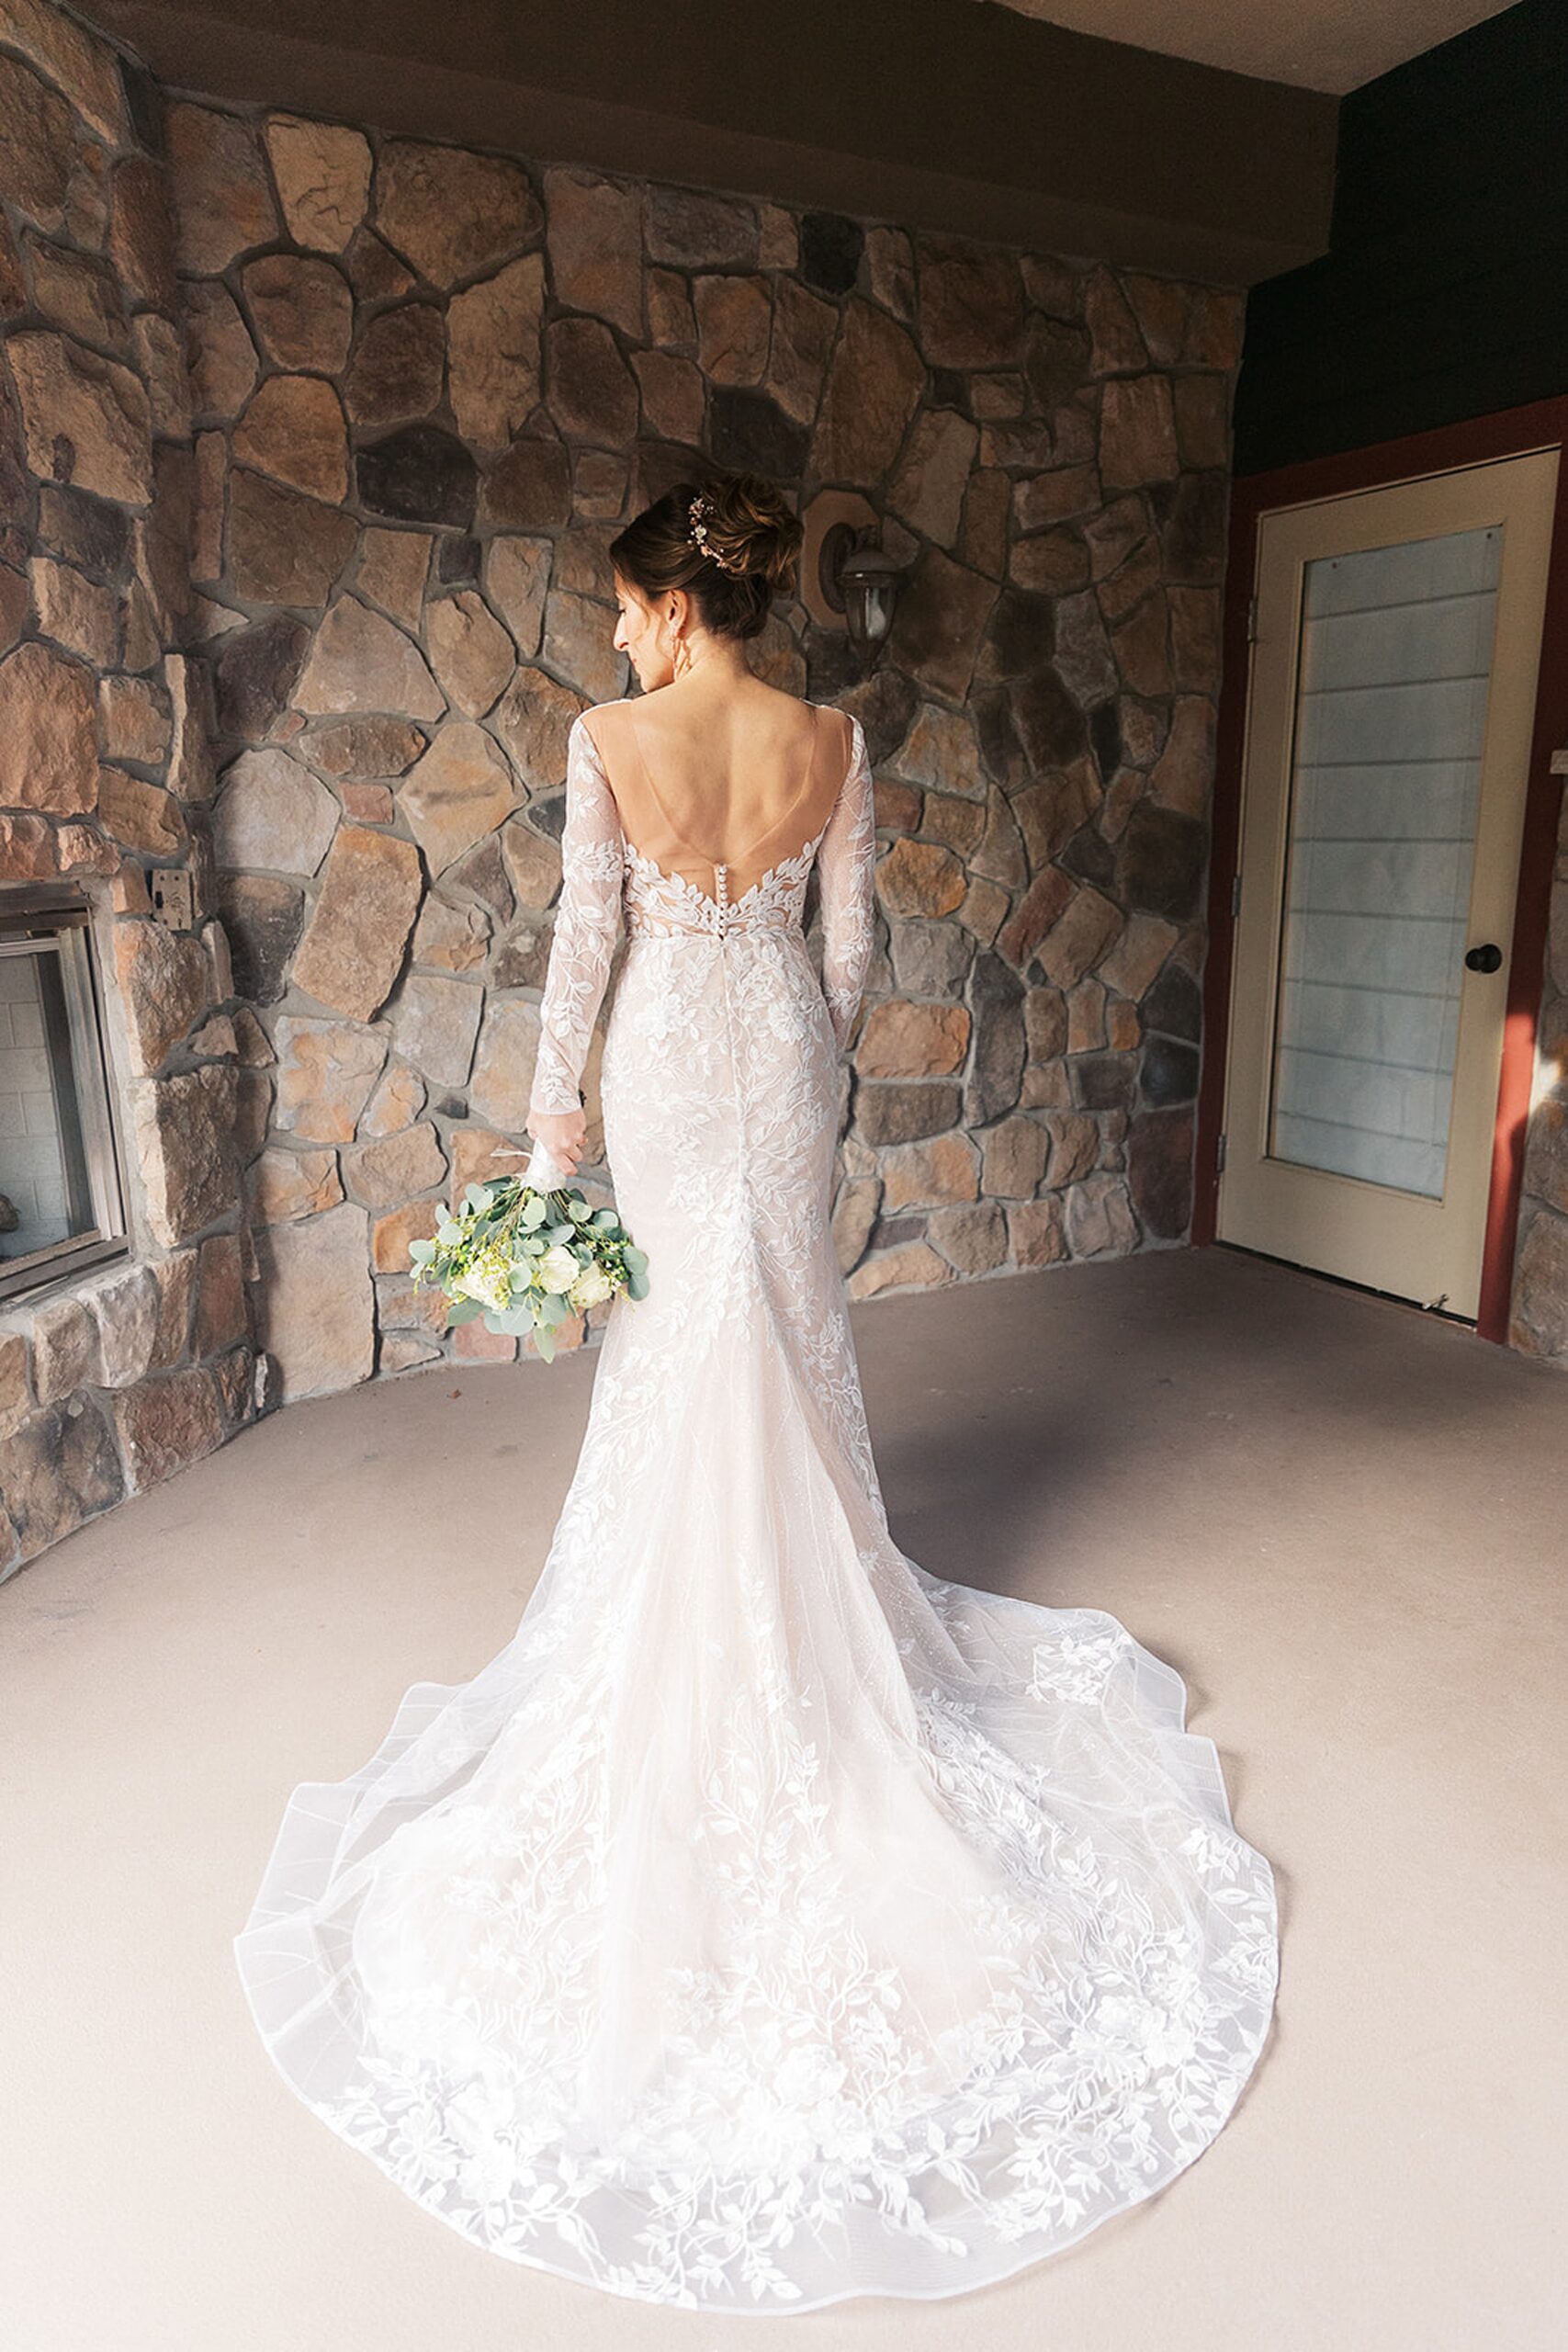 A bride stands by a stone fireplace in her white lace dress with bouquet held down by her side